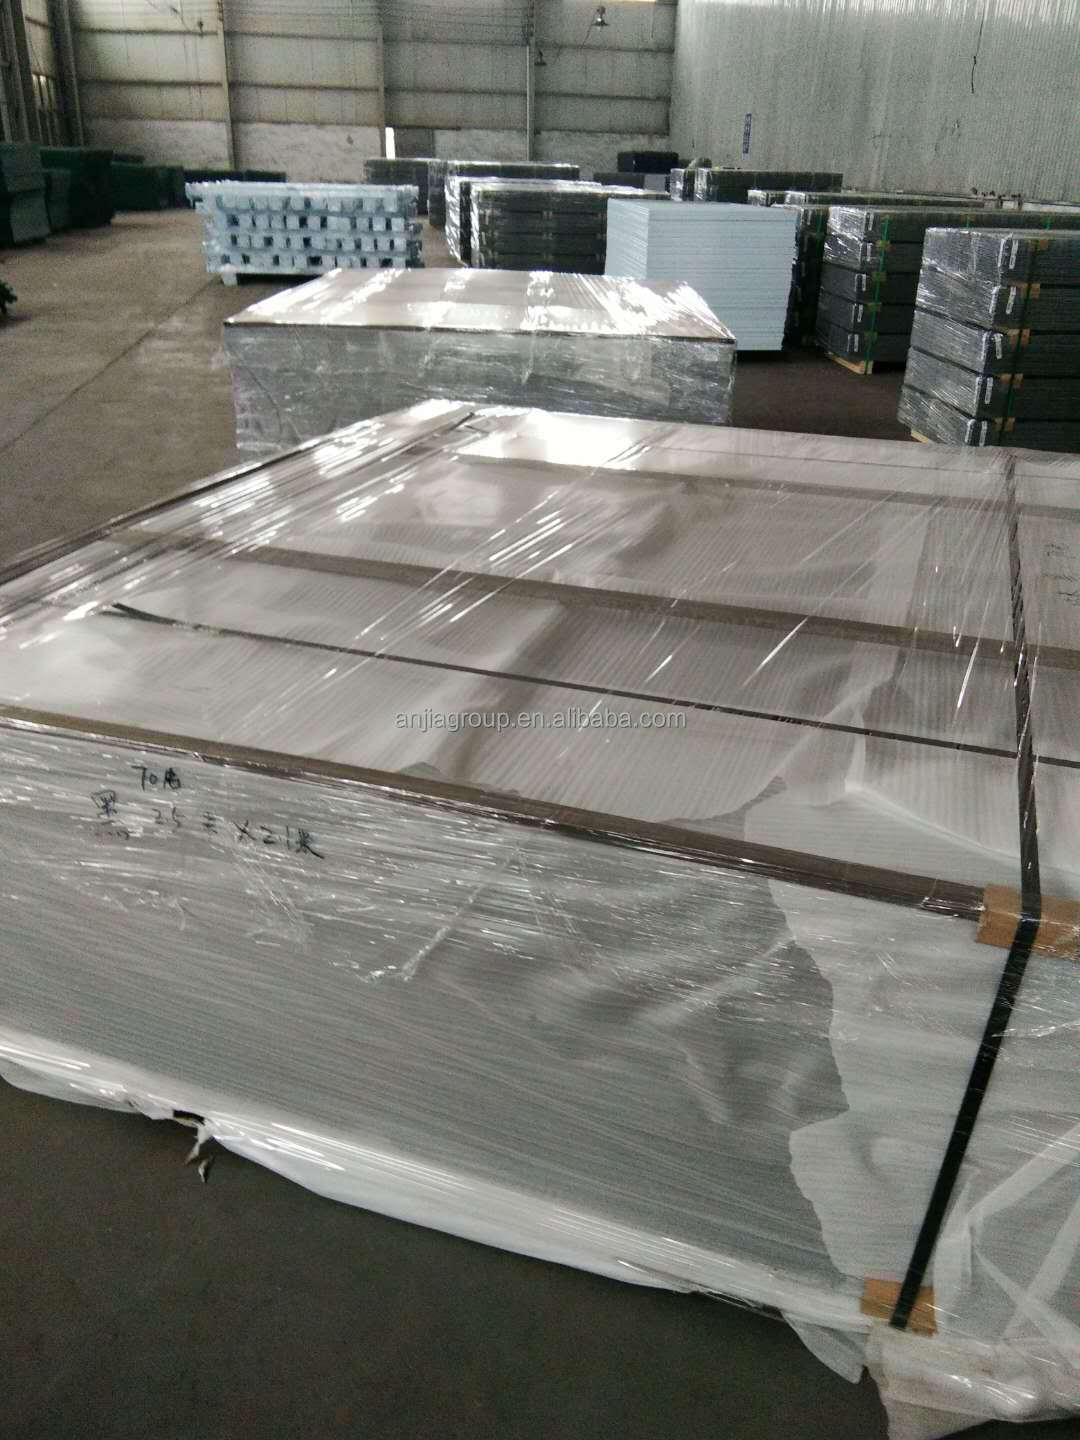 pallet package of fence